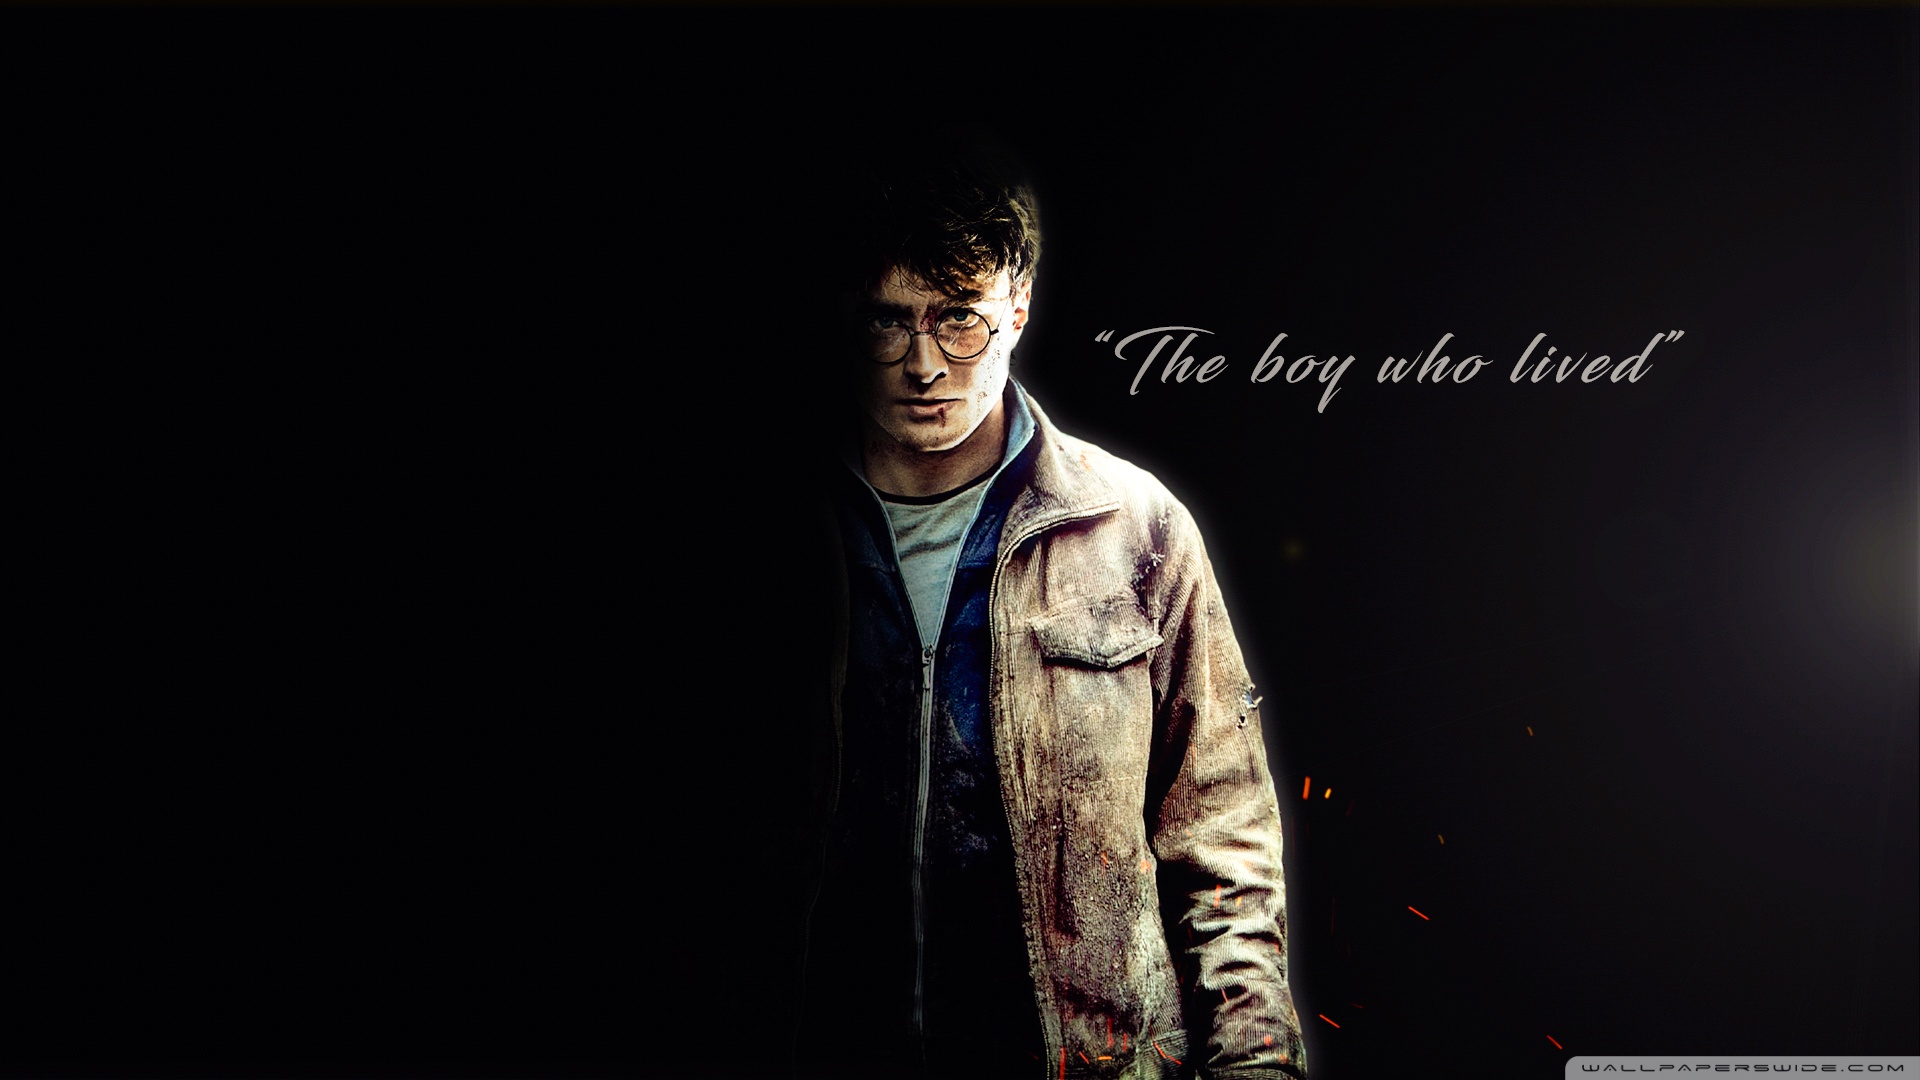 Harry Potter And The Deathly Hallows: Part Ii (2011) - HD Wallpaper 